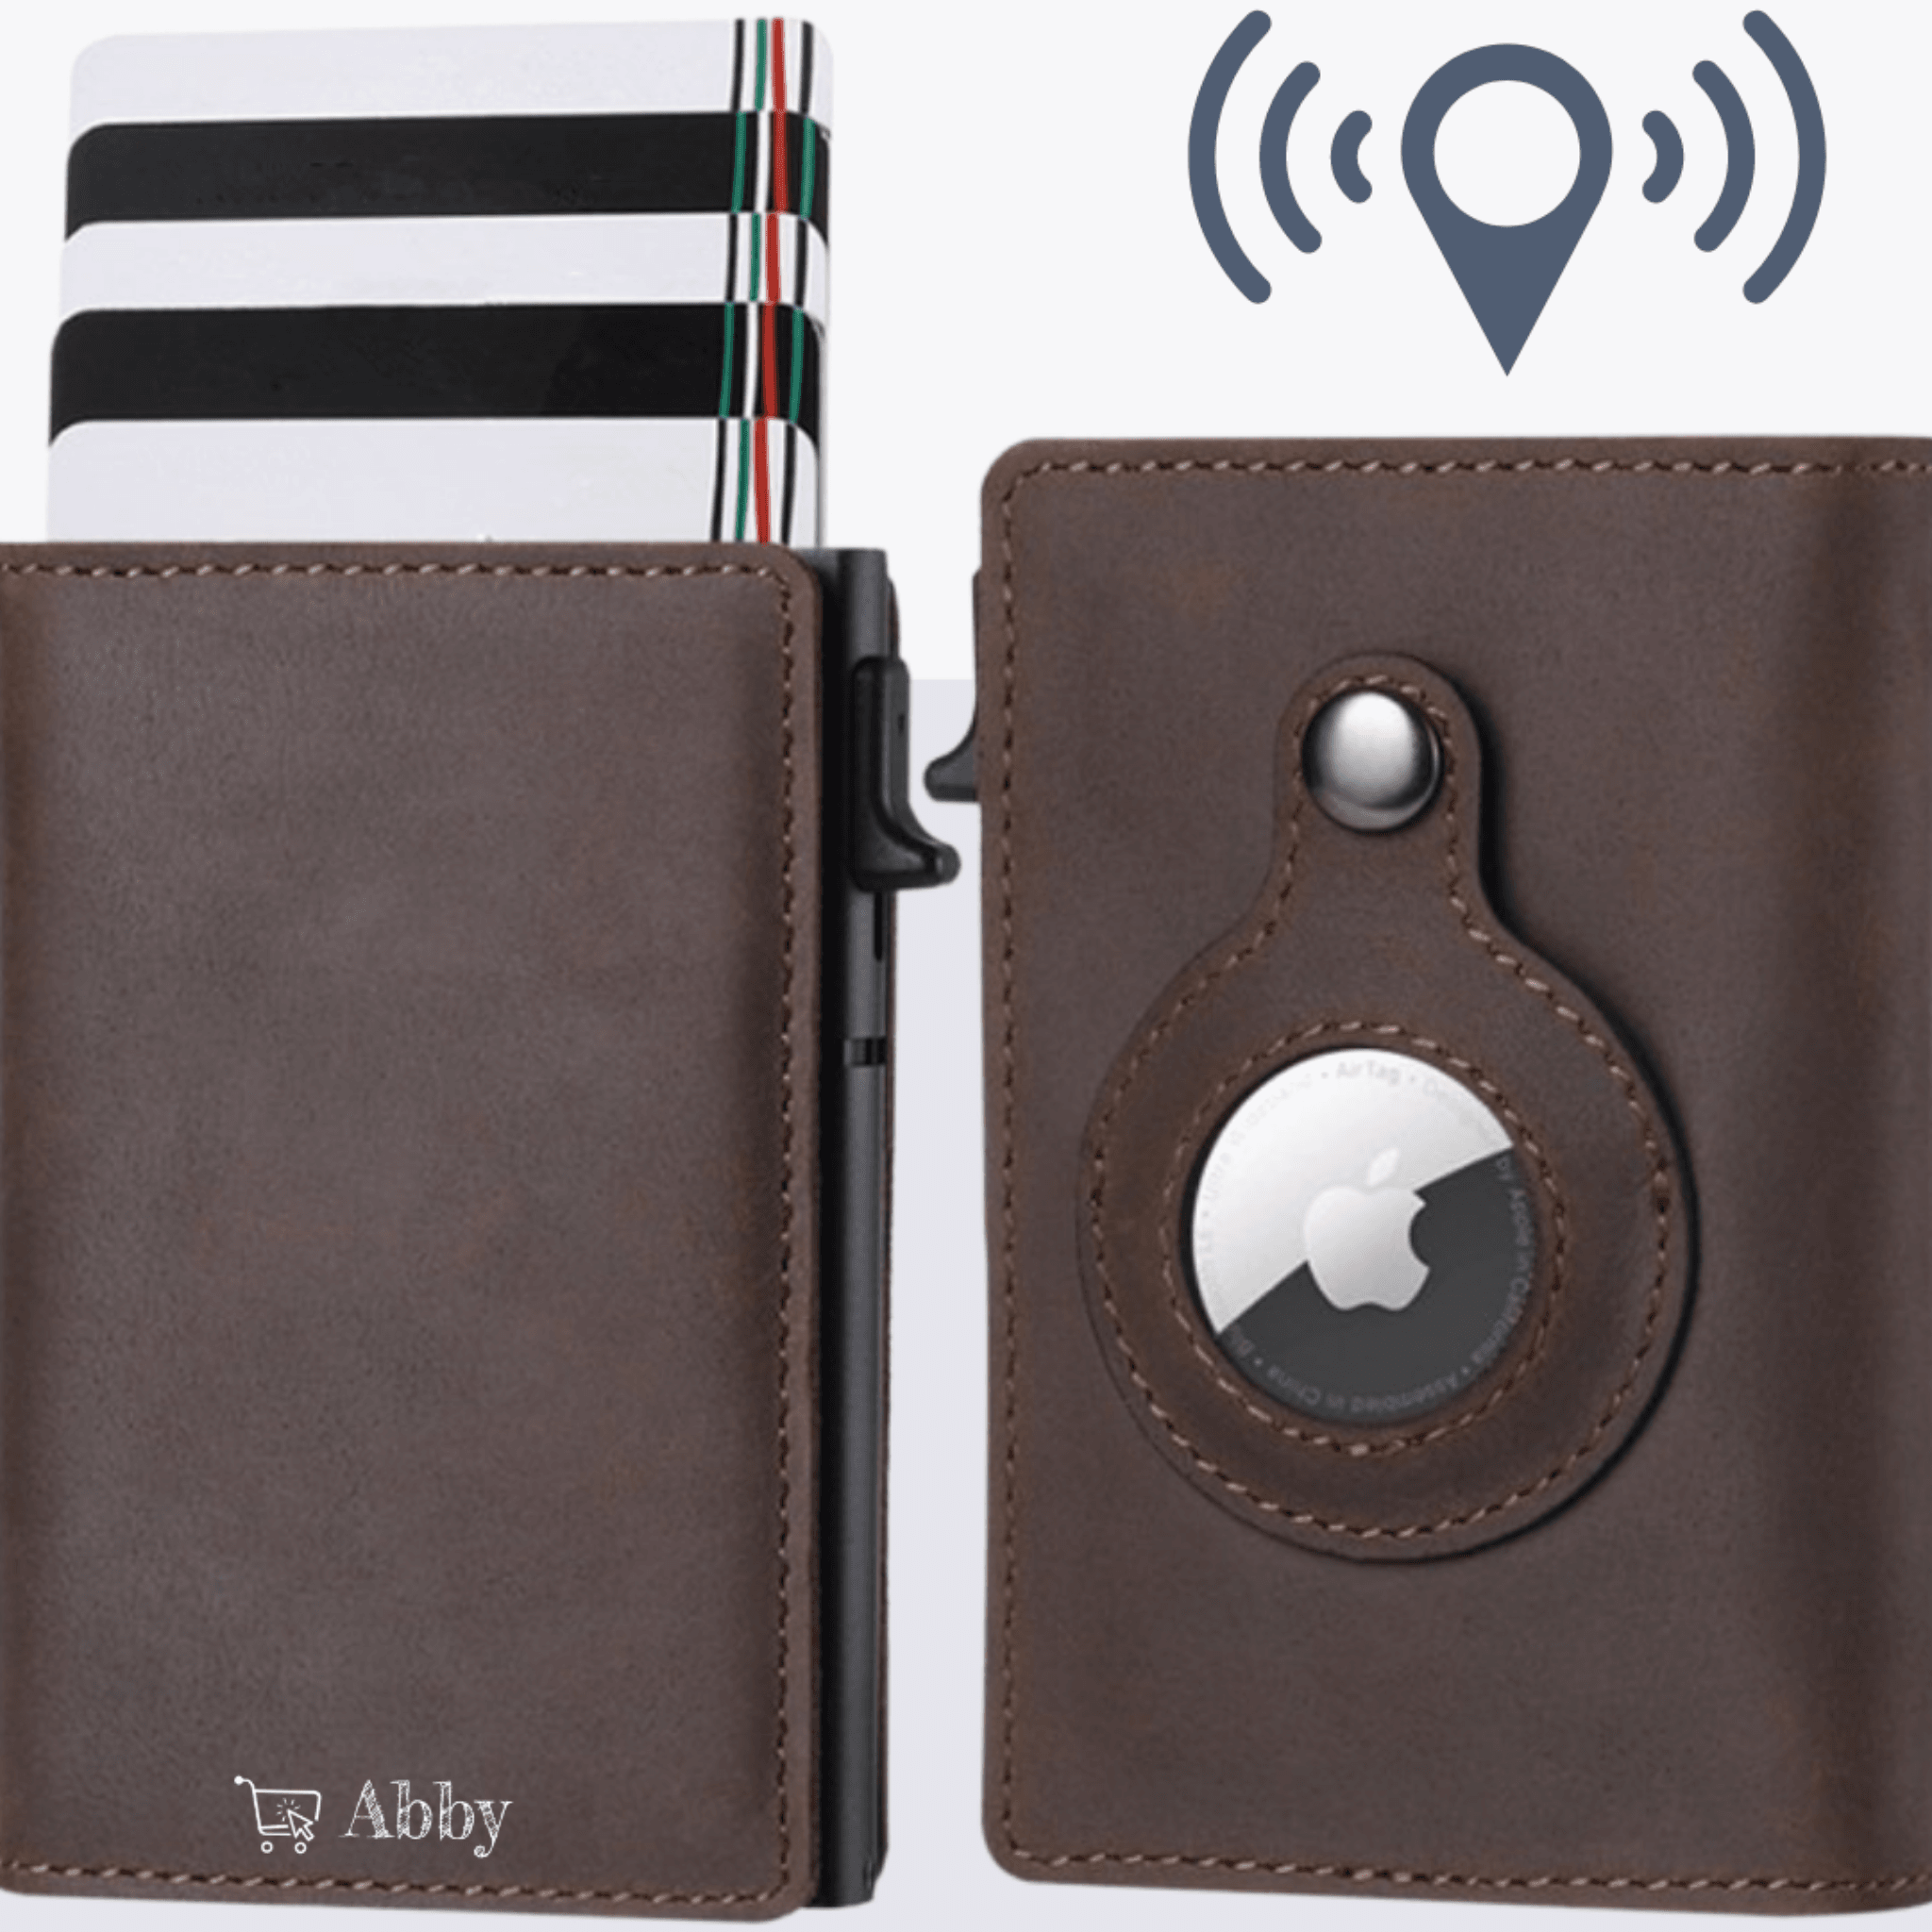 Abby's™ Anti-Lost Slim Leather Wallet with Apple AirTag Case - RFID Protection - Abbycart